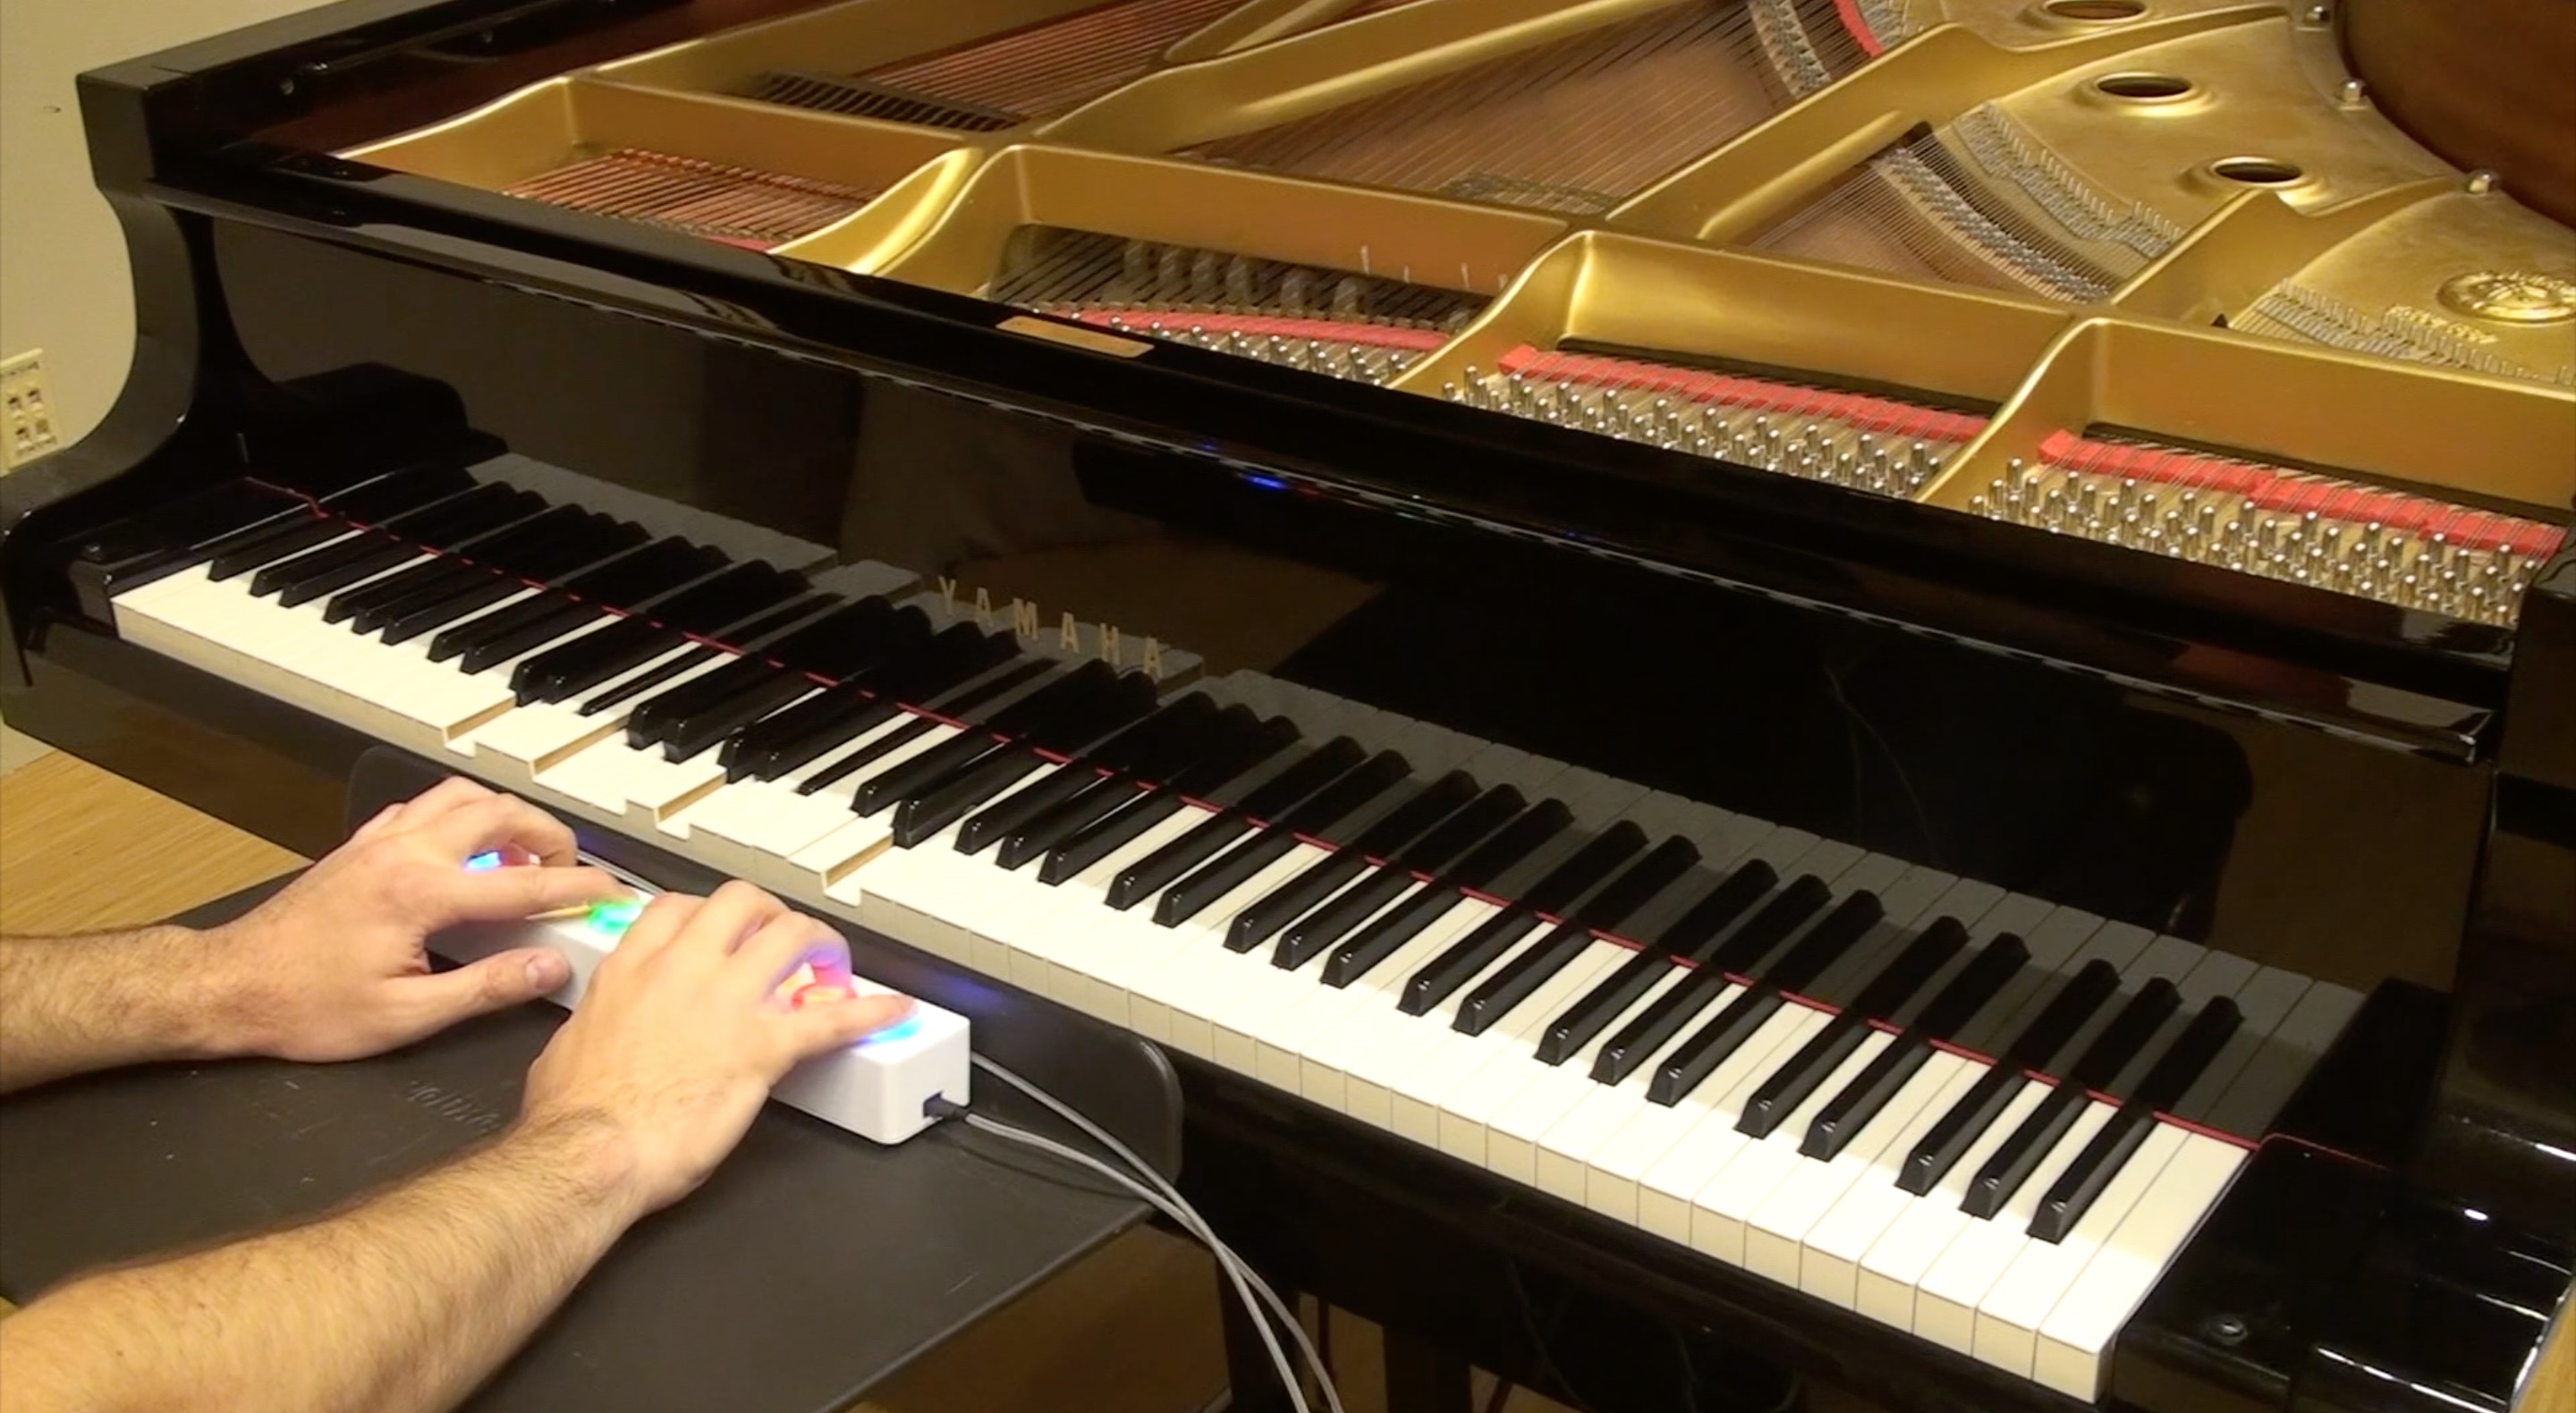 Piano Genie: An Intelligent Musical Interface